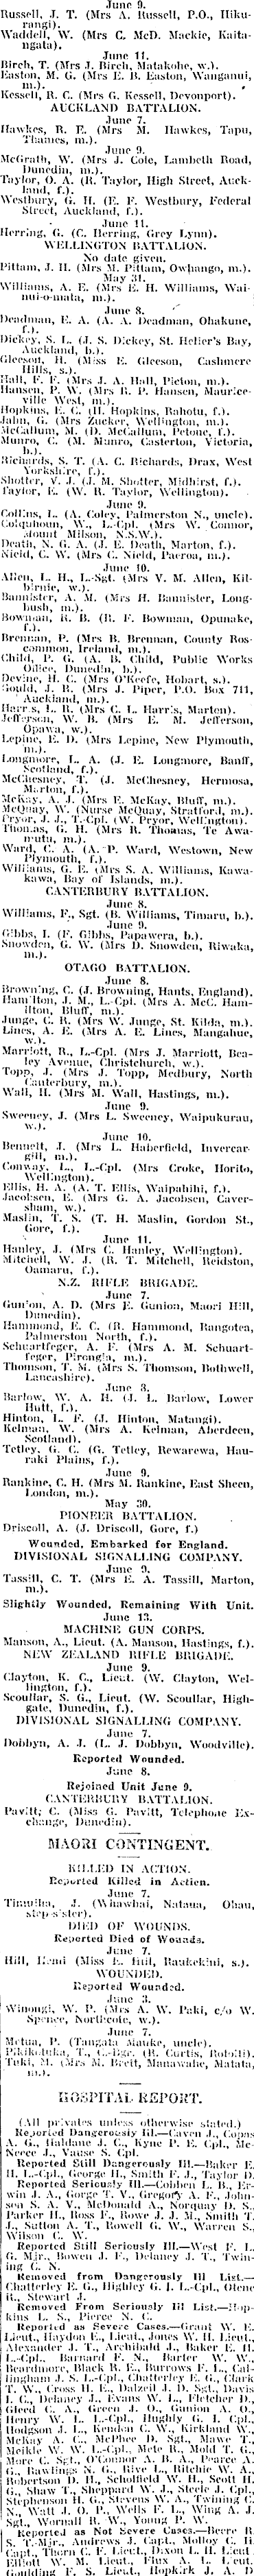 Papers Past Newspapers Sun Christchurch 23 June 1917 Casualties